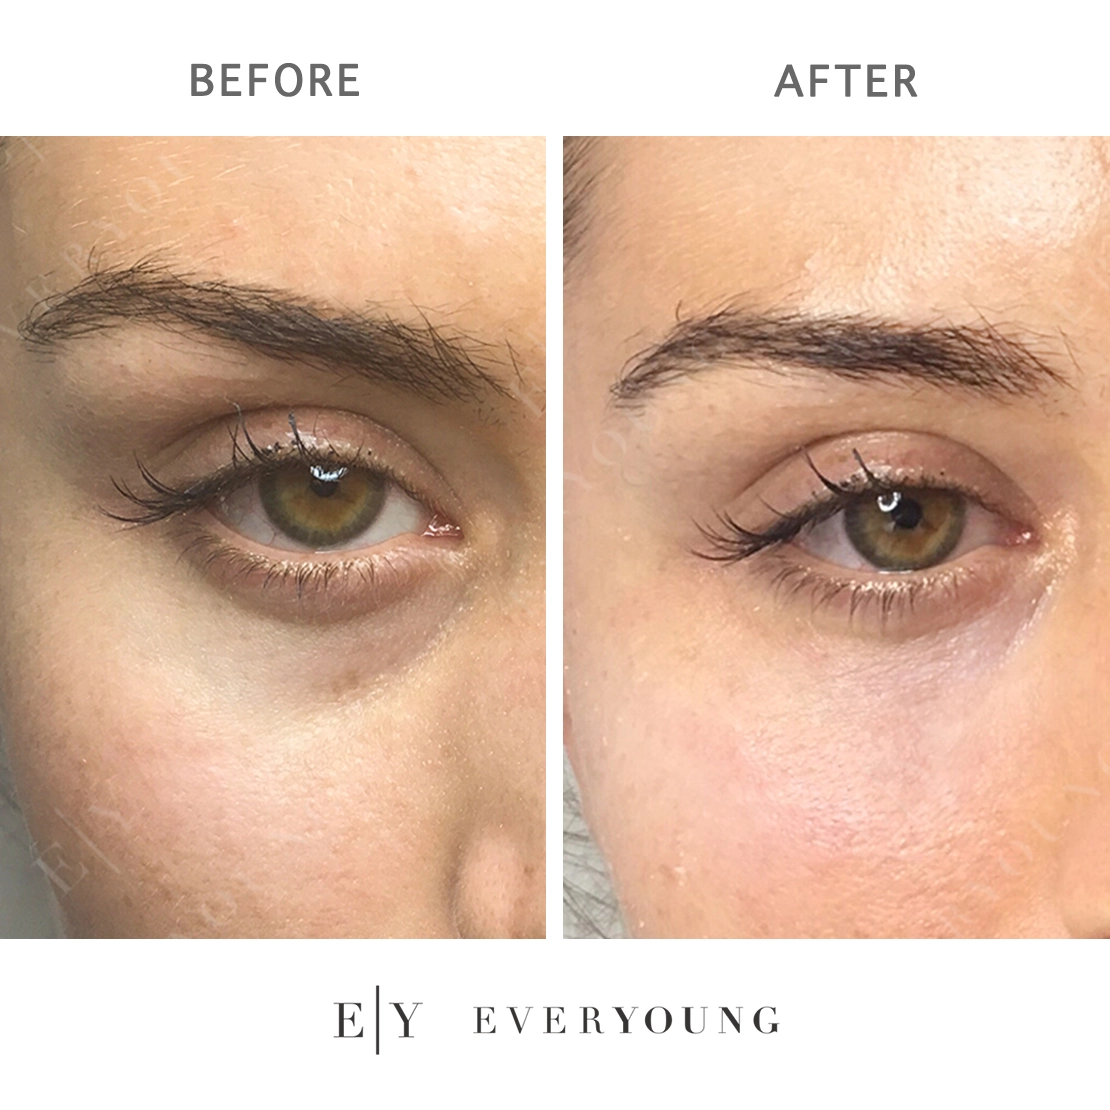 Before and After Results | EverYoung Skin Care Clinic Vancouver